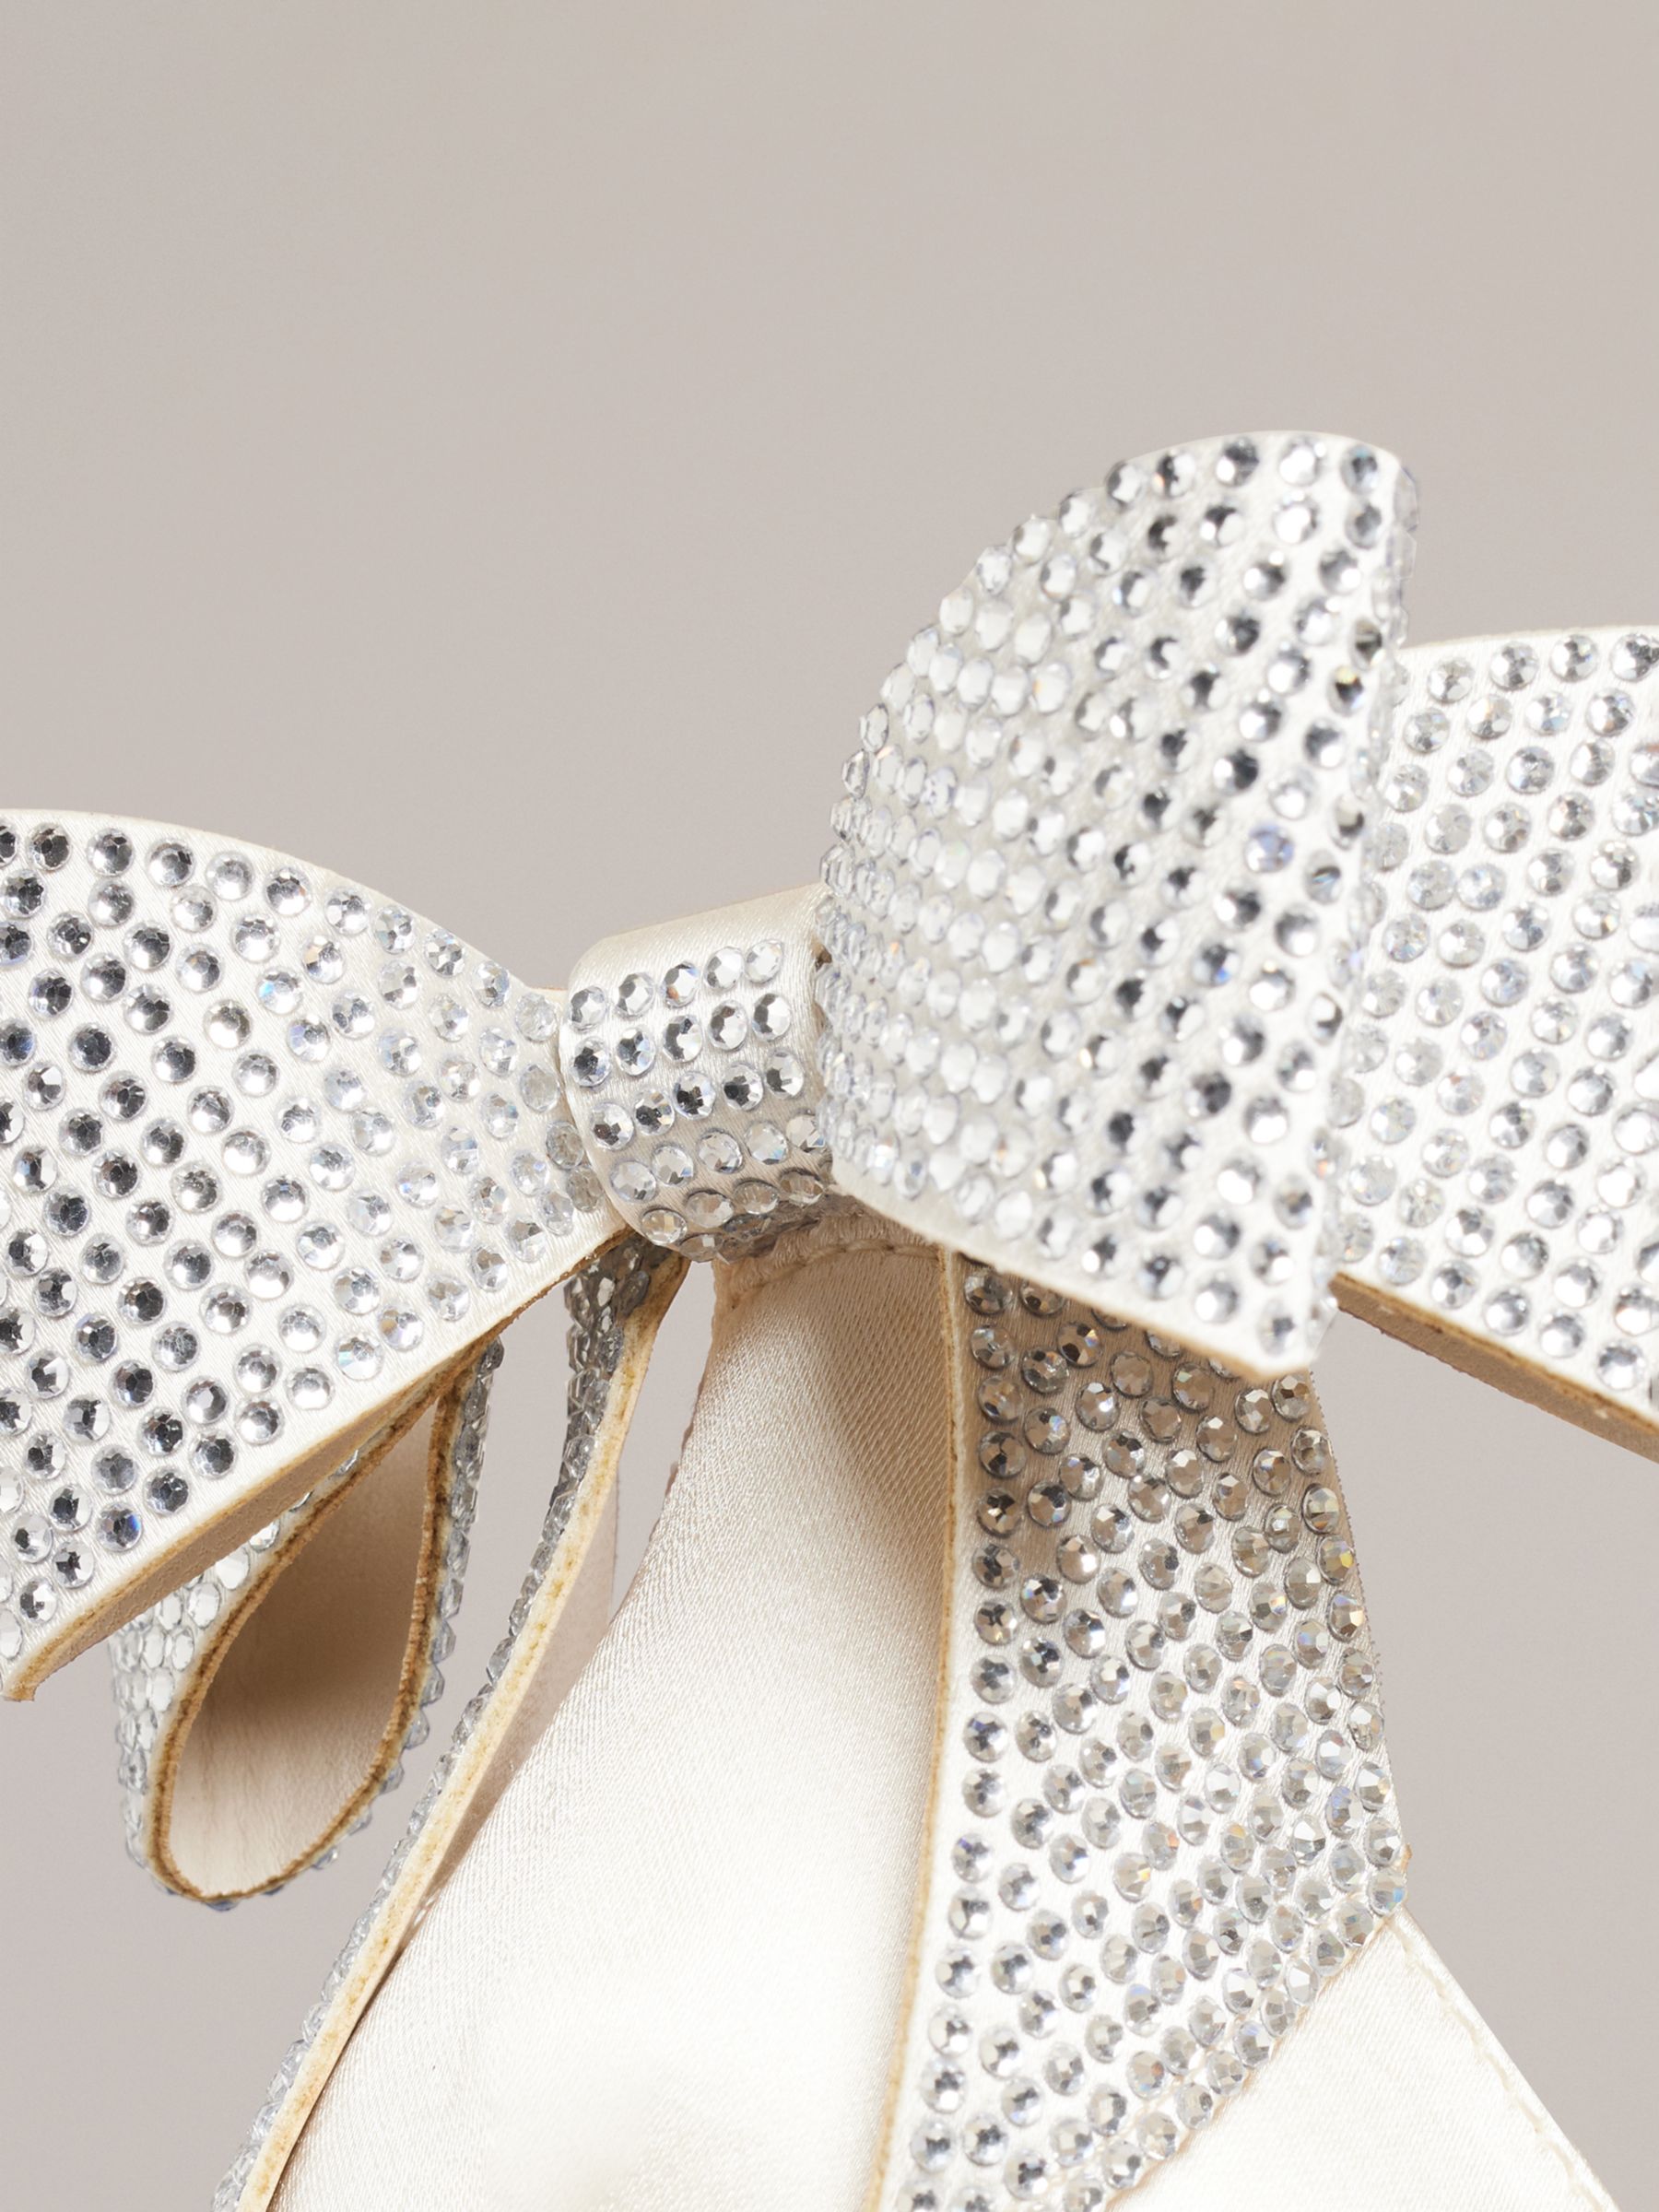 Buy Ted Baker Hemary Satin Crystal Bow Back Sandals, Ivory Online at johnlewis.com